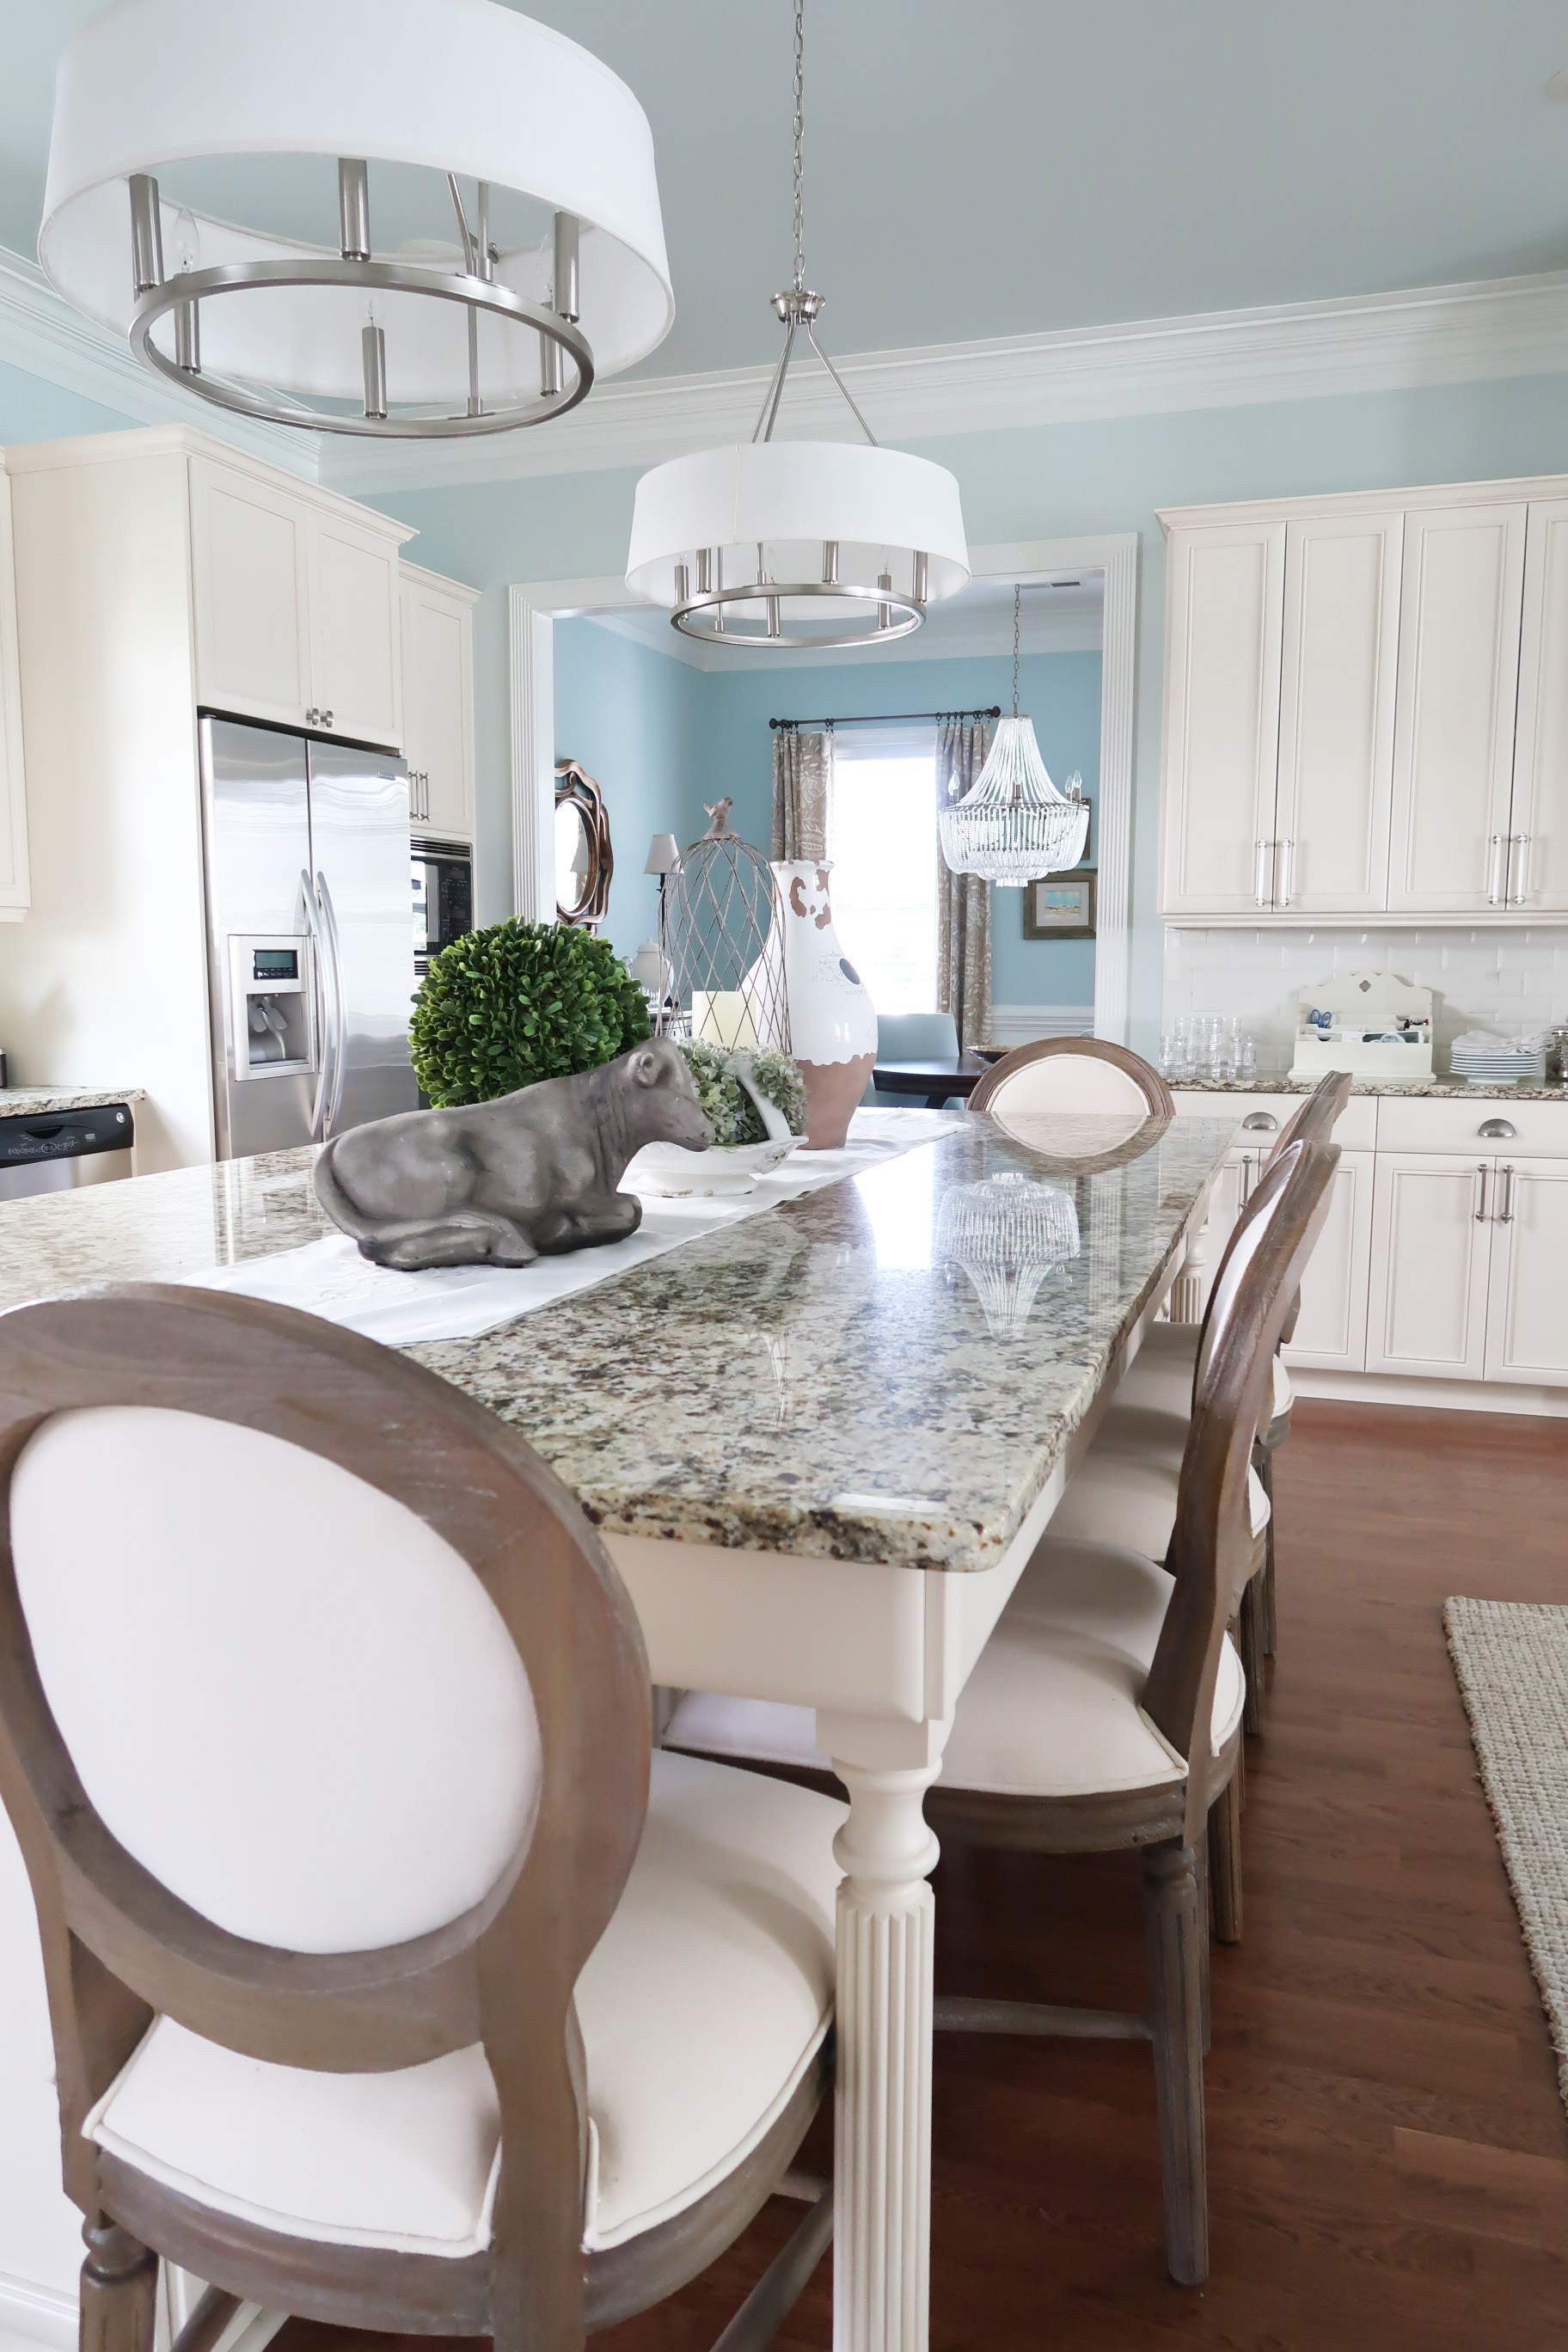 Kitchen Island Pendant Lights and Dining Room Chandelier